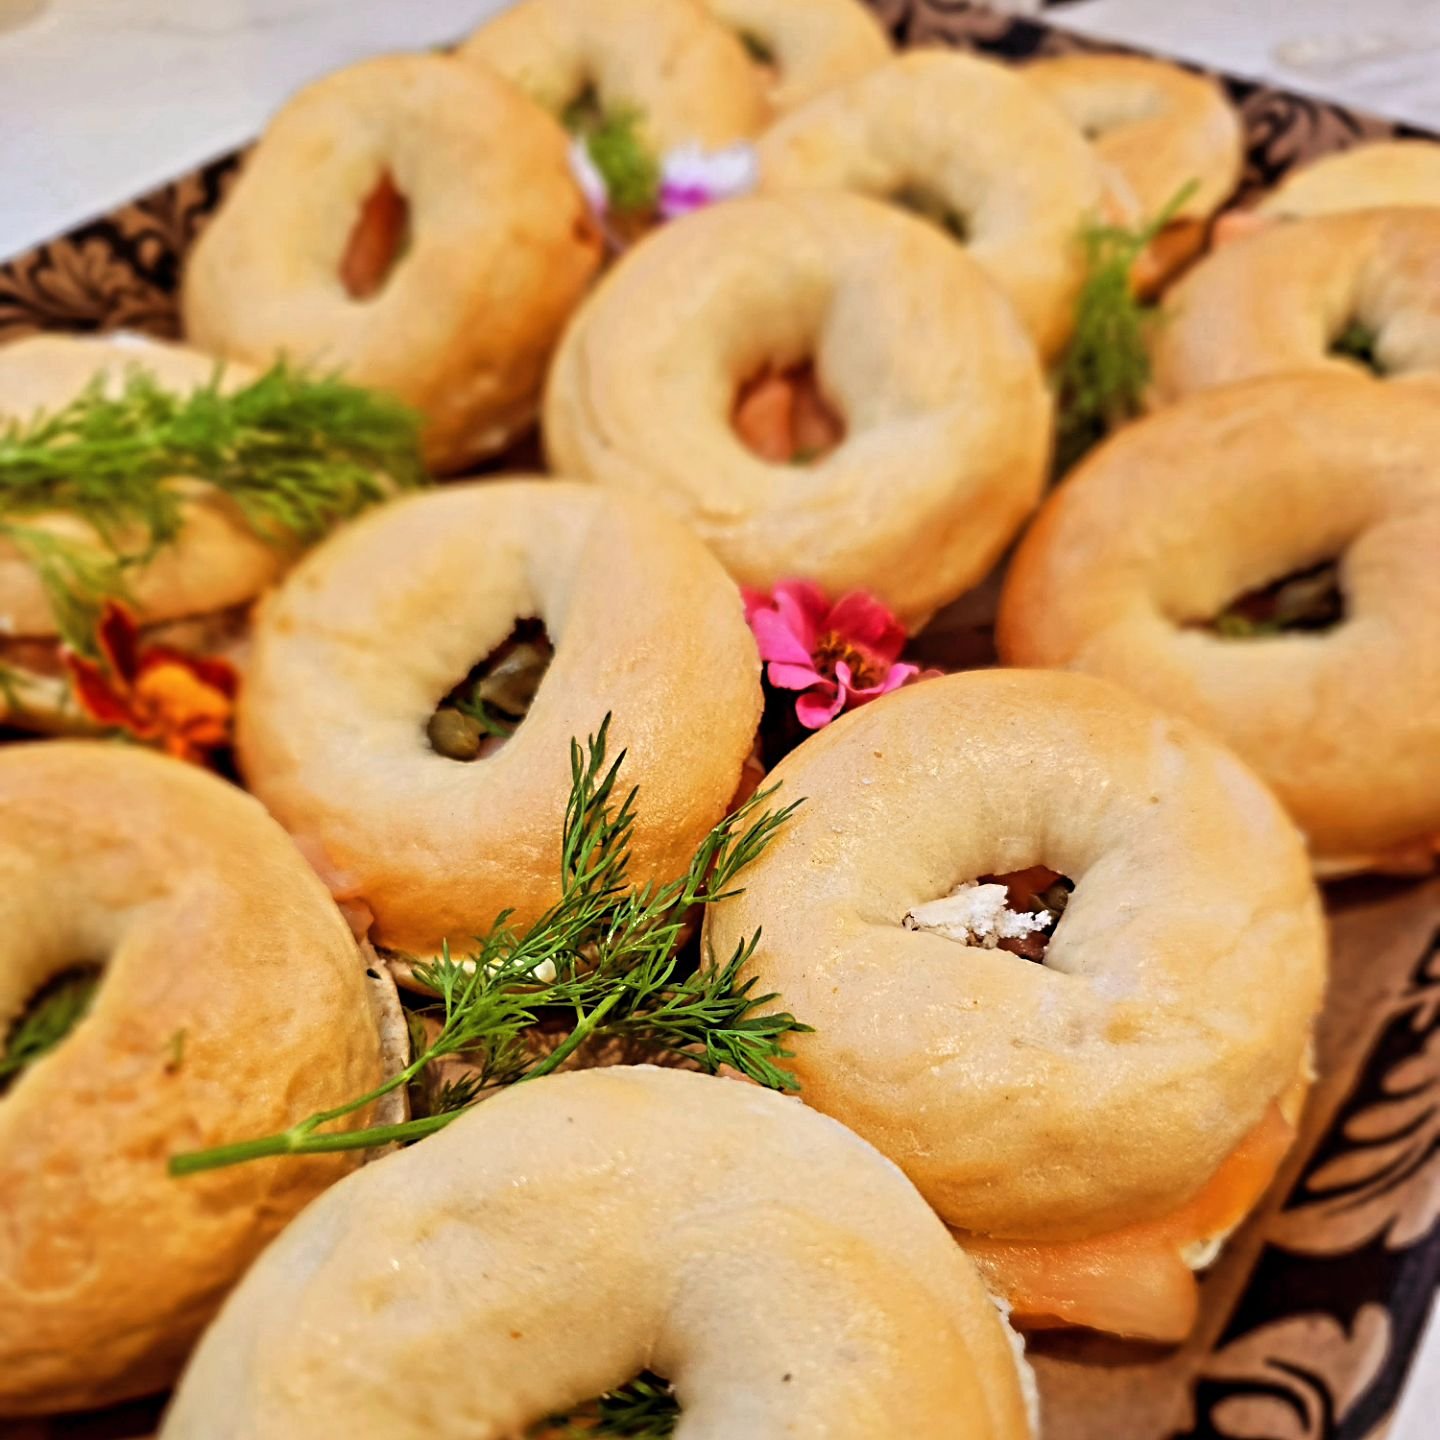 These delish Mini Bagels are available to order straight from our website 👇

https://orders.ellajayecatering.co.nz/

*Image is of our Smoked Salmon &amp; Cream Cheese Mini Bagels